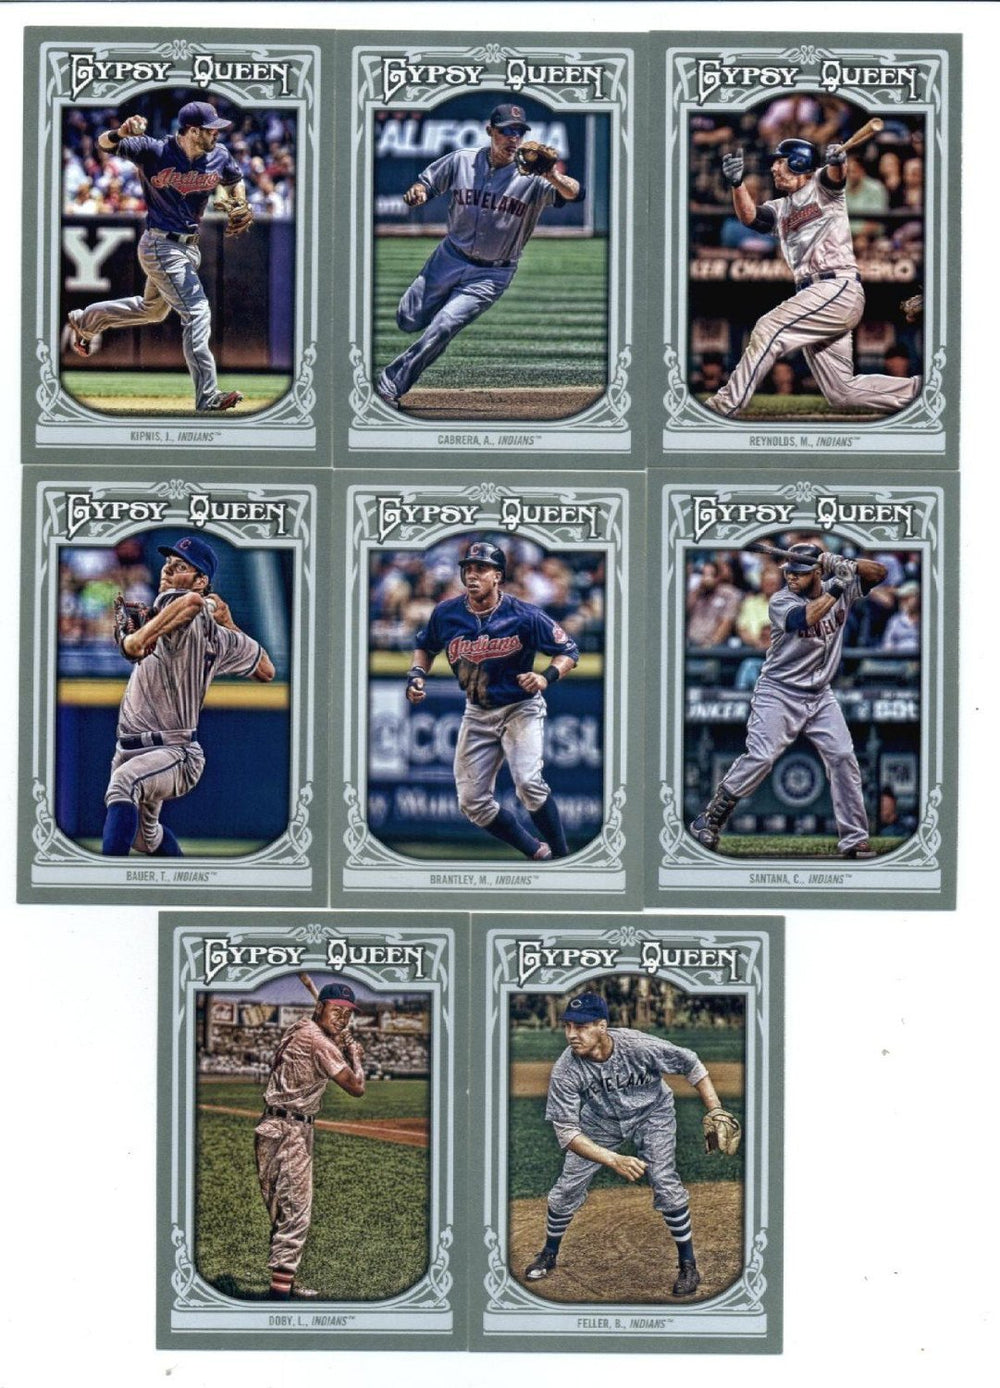 Cleveland Indians 2013 Topps GYPSY QUEEN Team Set with Carlos Santana and Bob Feller Plus